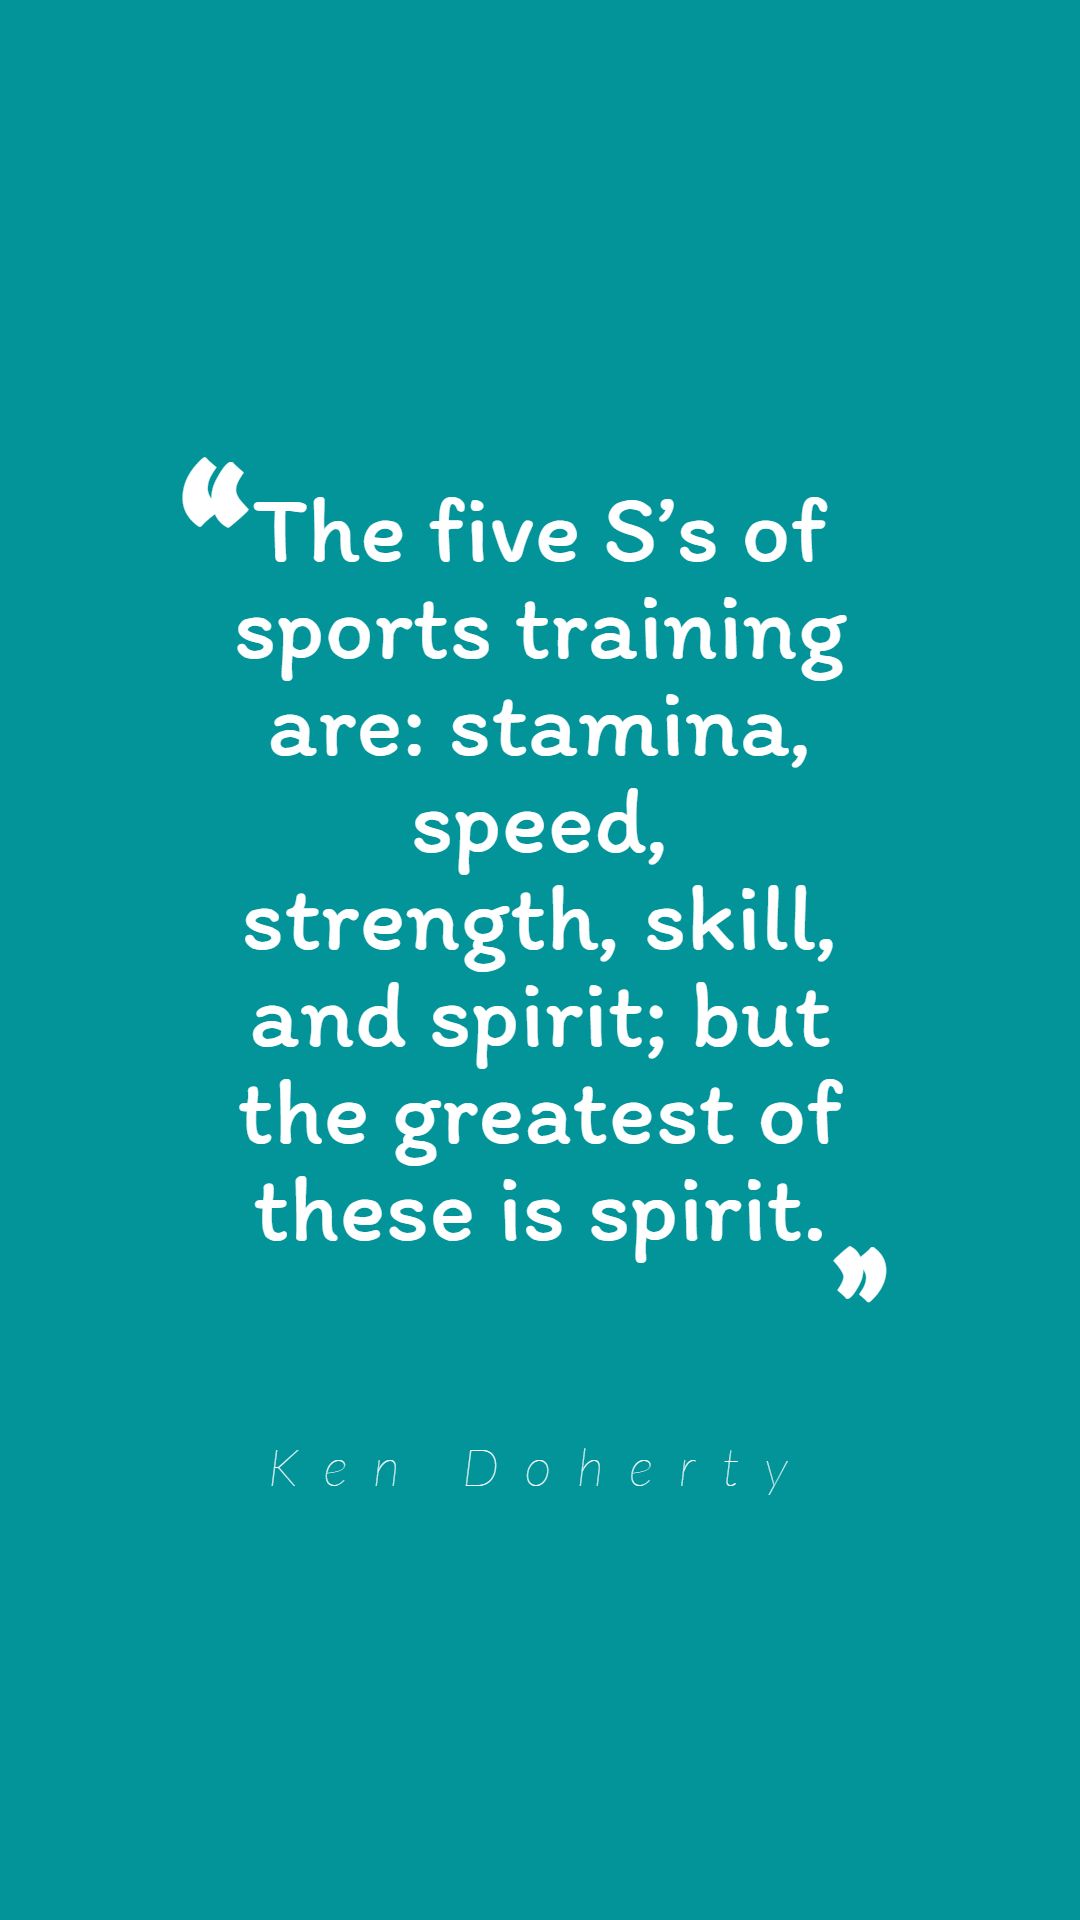 The five S’s of sports training are stamina speed strength skill and spirit but the greatest of these is spirit.